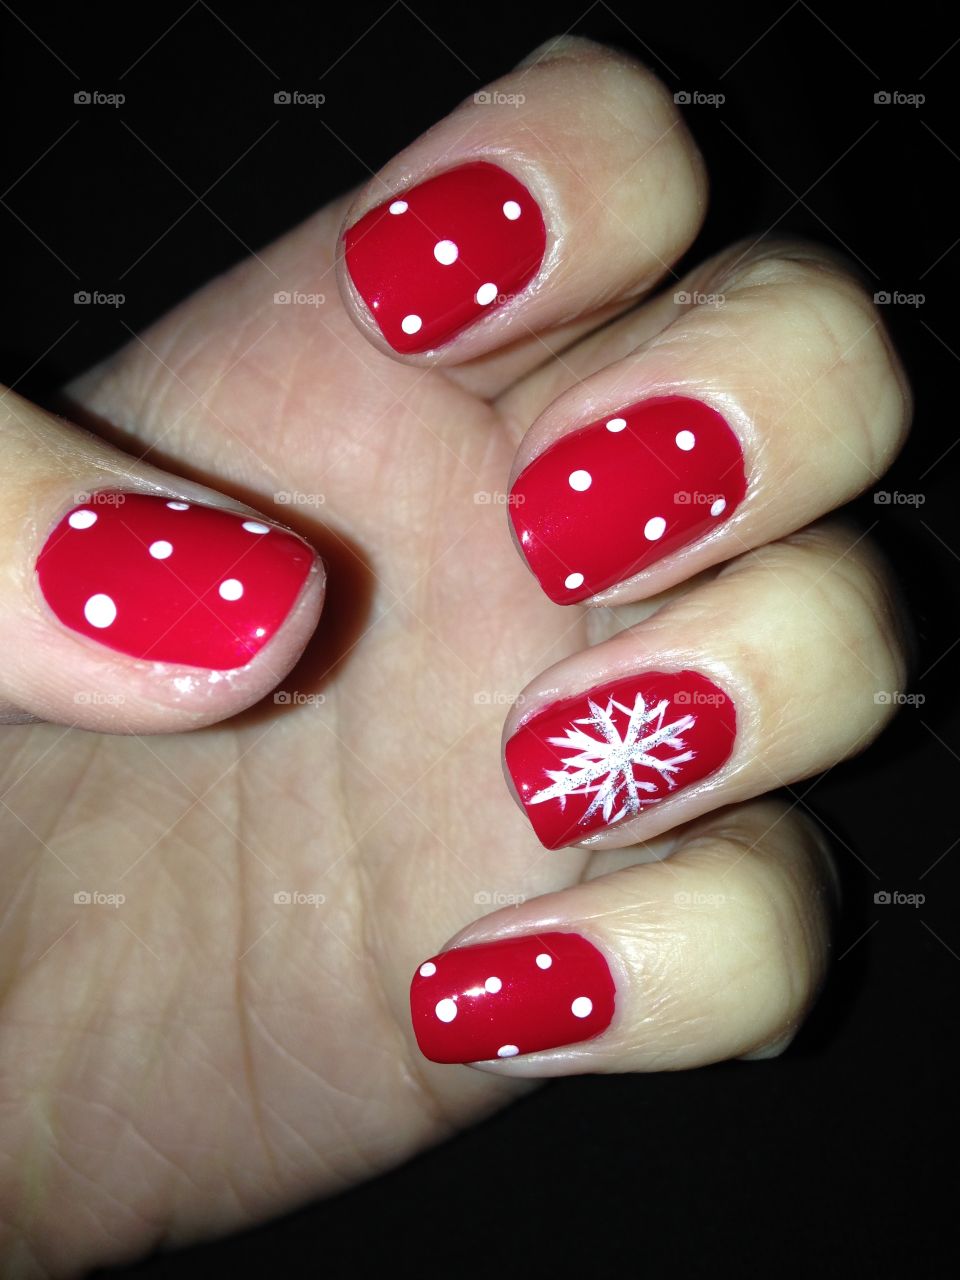 Can't wait to get my nails done again like this next Christmas!